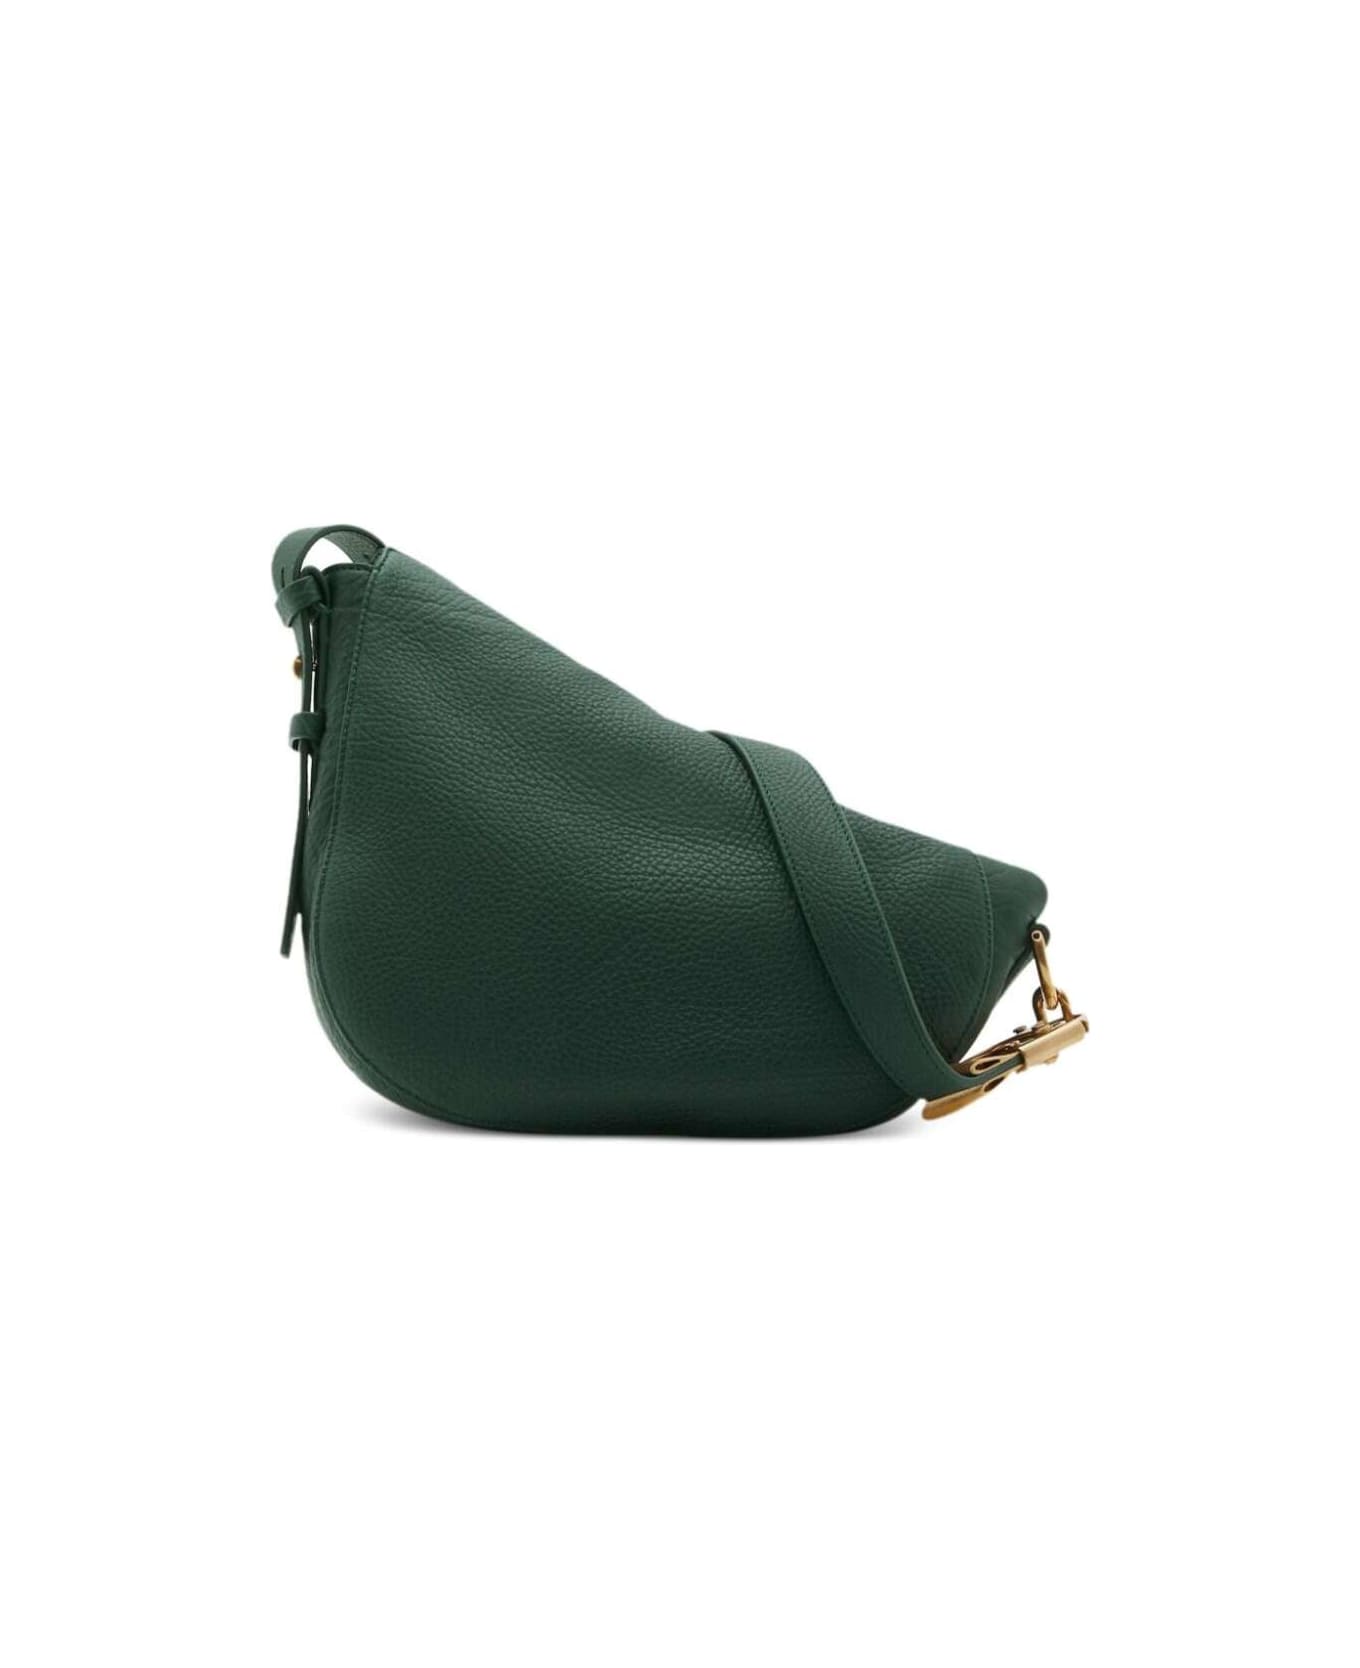 Burberry Small Knight Bag - Green